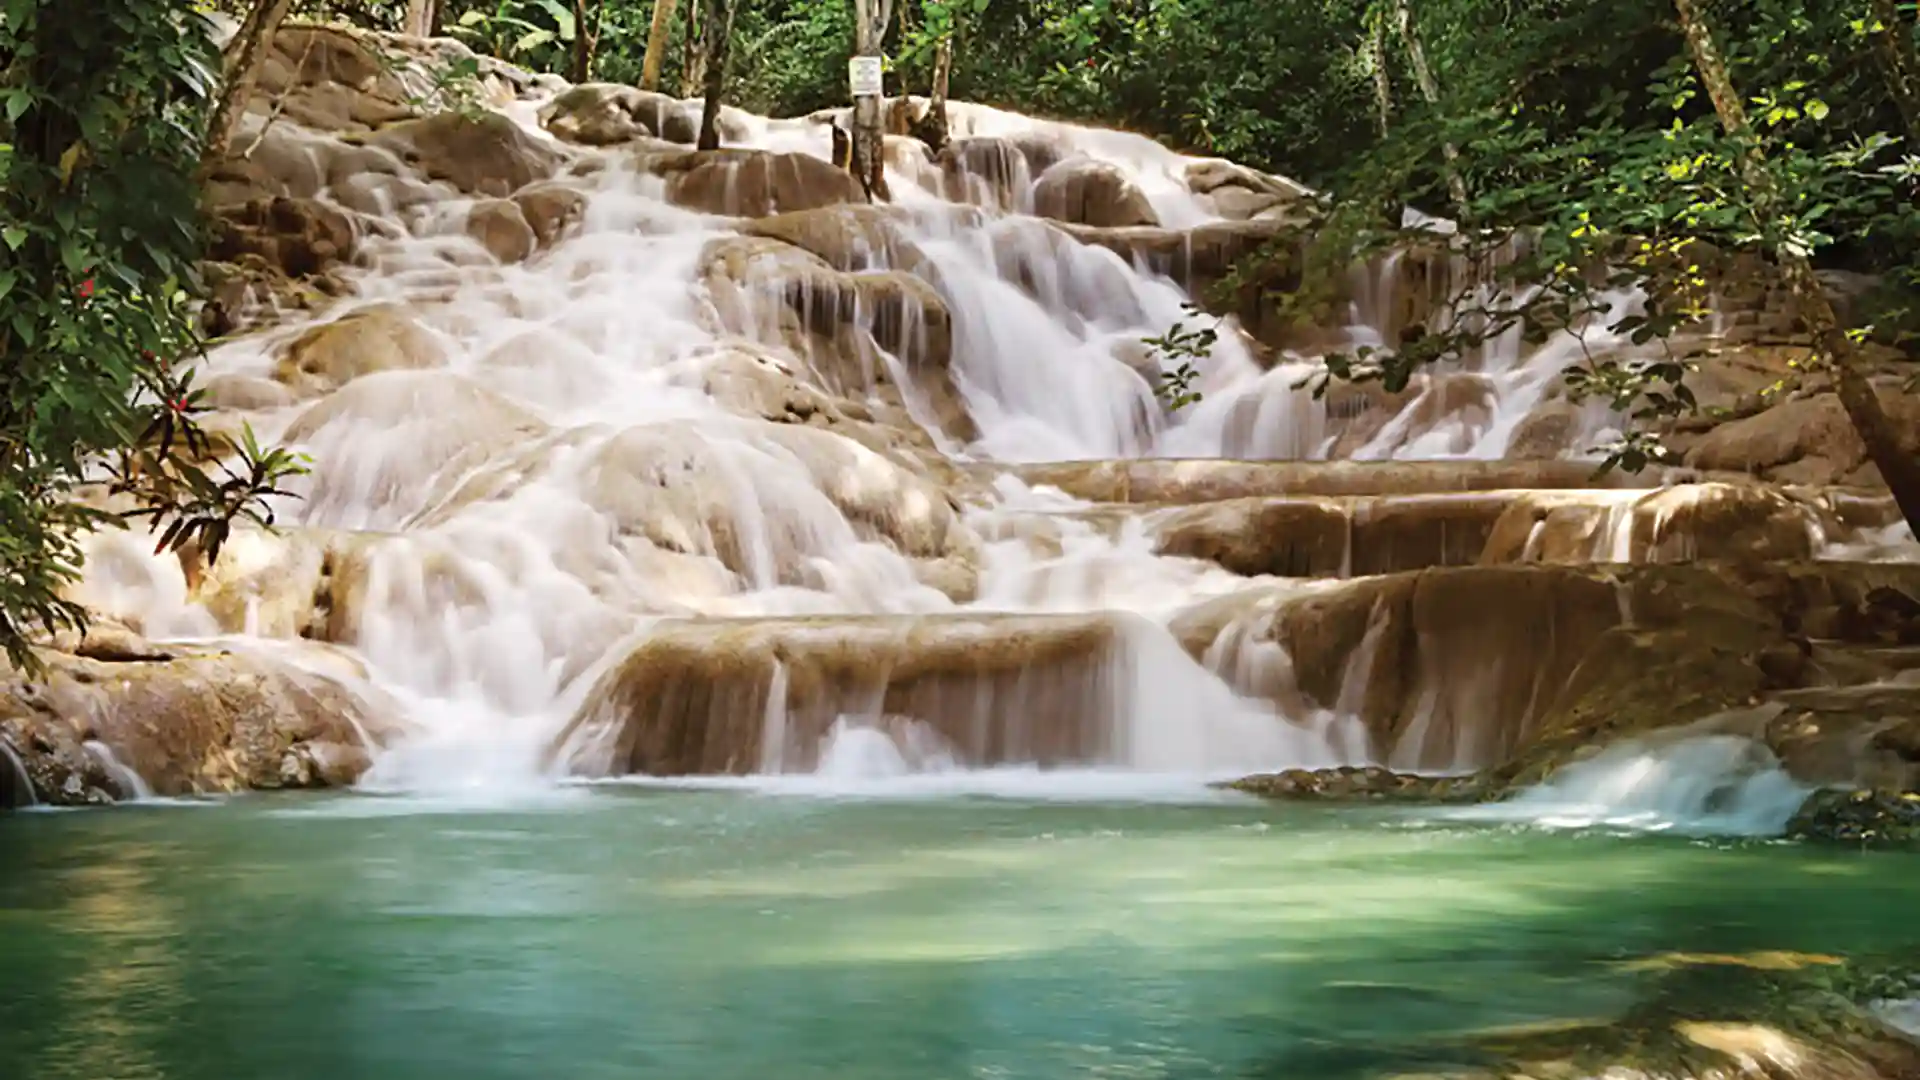 View of Jamaica's Dunn's River Falls, surrounded by green forest.